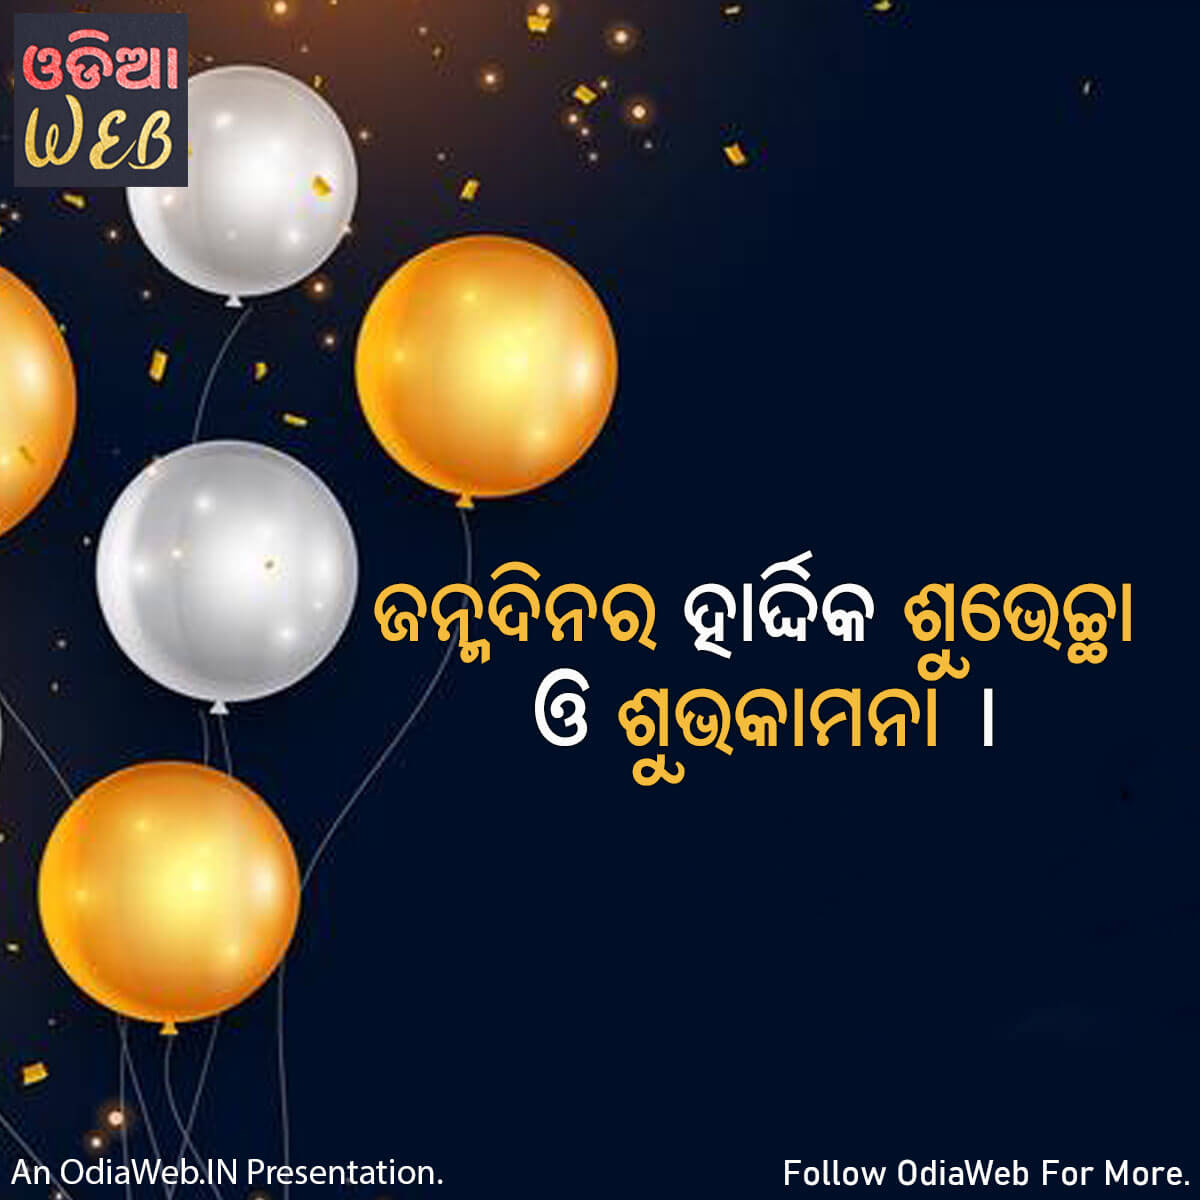 Odia Quotes on Birth day